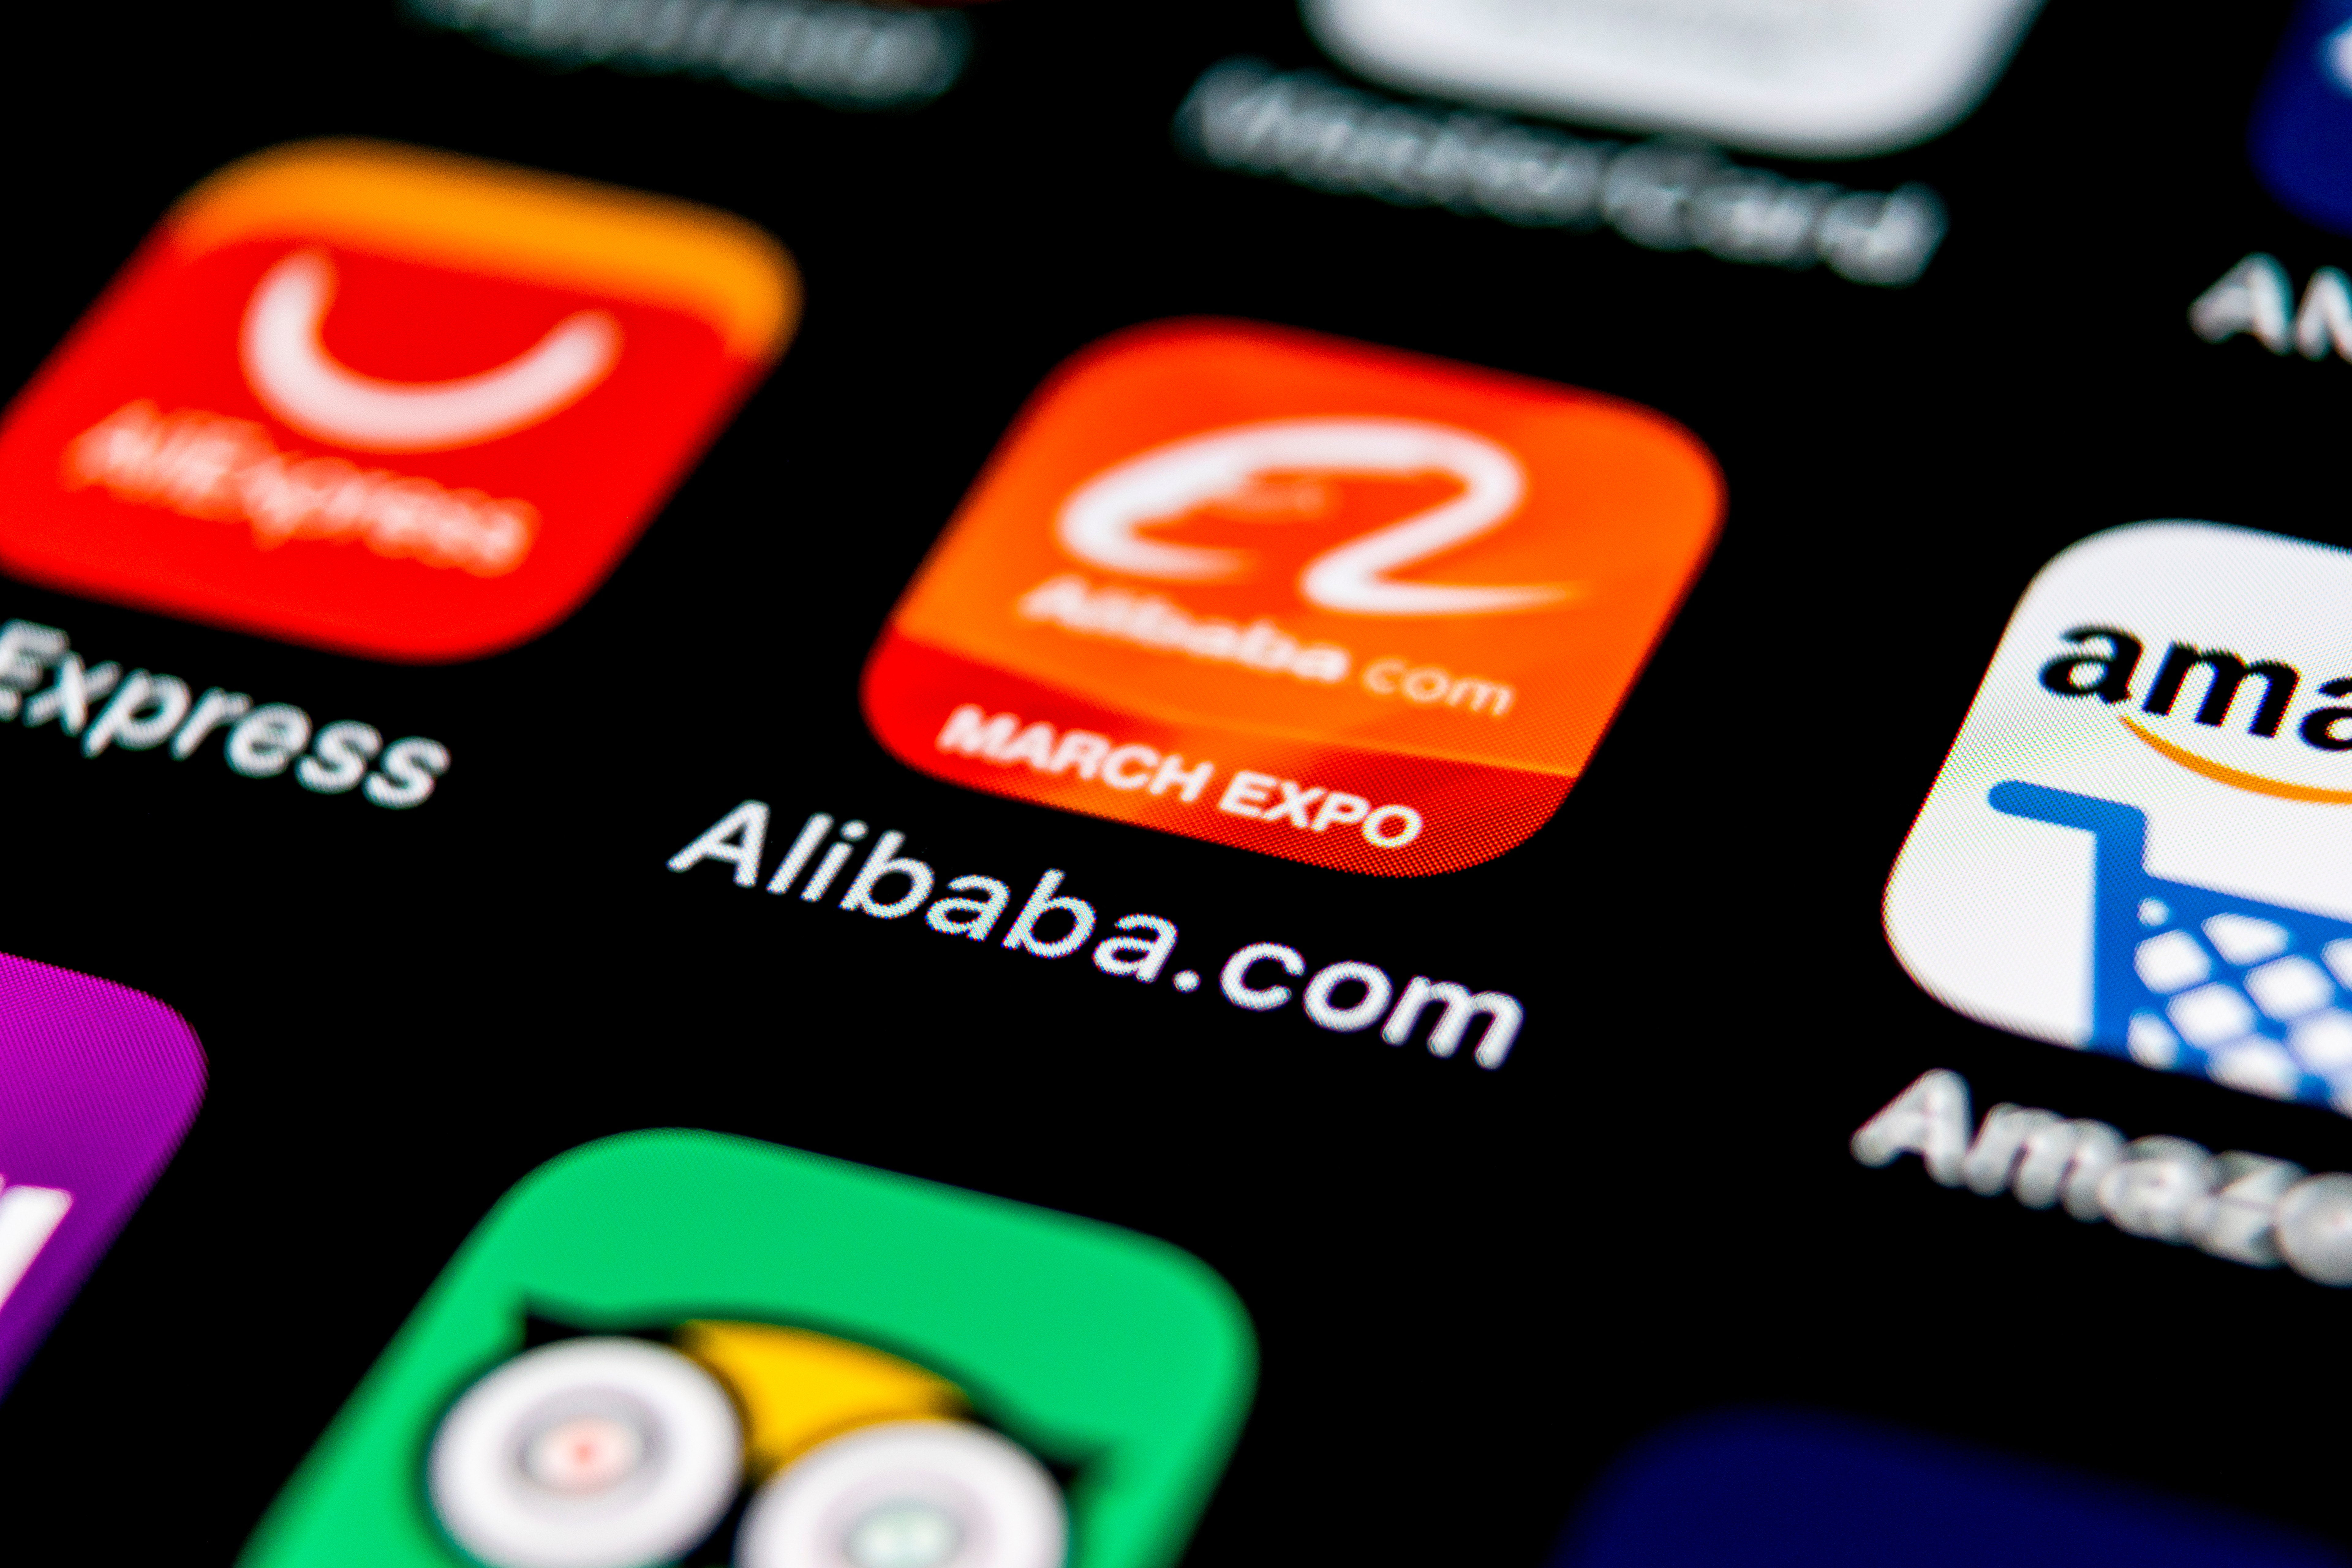 Alibaba Options Traders Bet On Stock Surging This Much By September Expiration